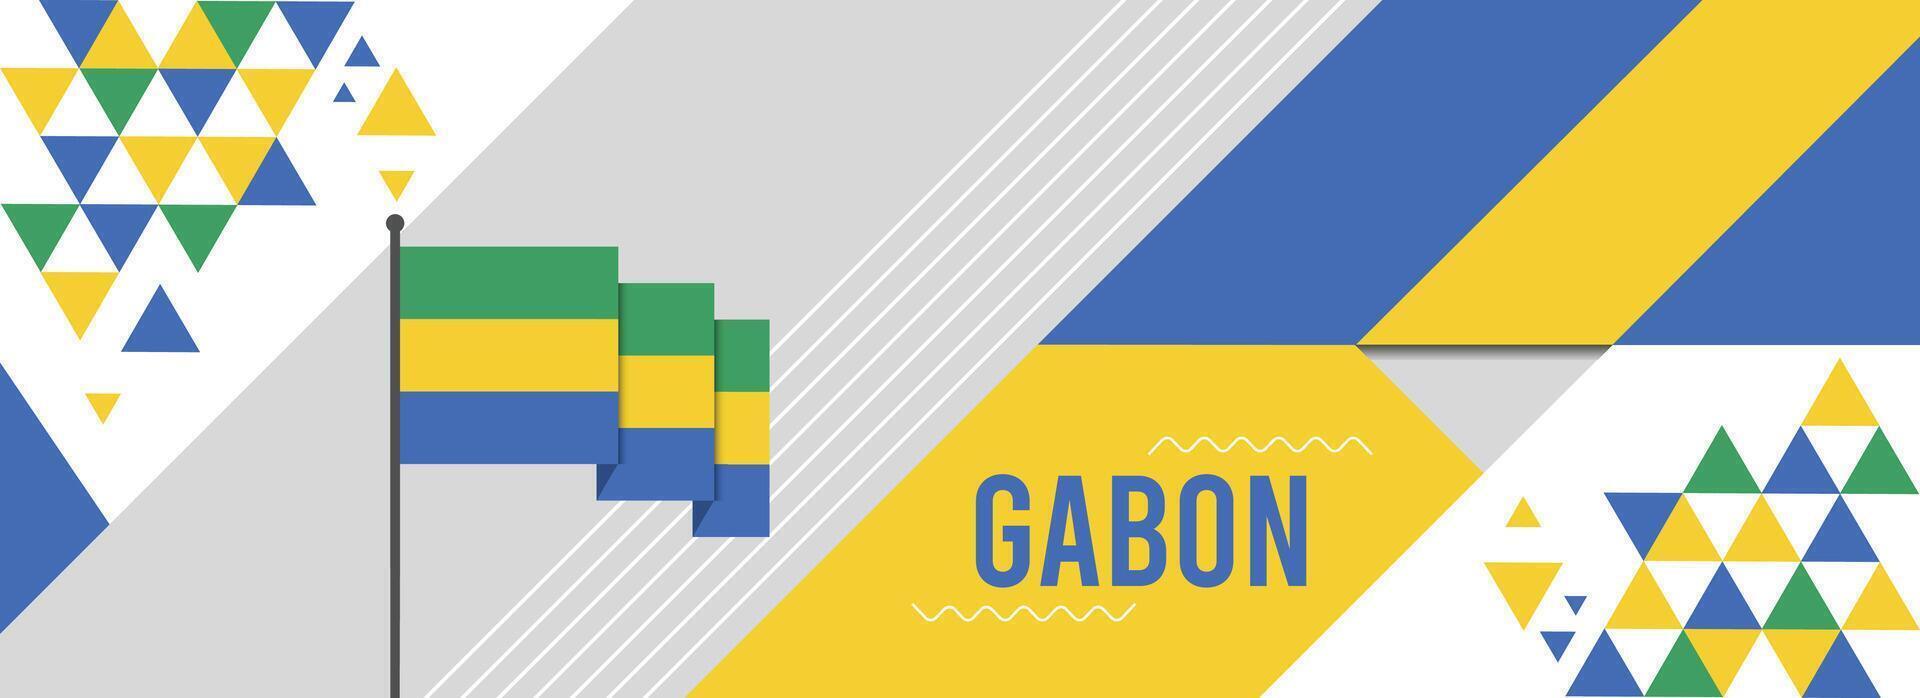 Gabon national or independence day banner for country celebration. Flag and map of Gabon with raised fists. Modern retro design with typorgaphy abstract geometric icons. Vector illustration